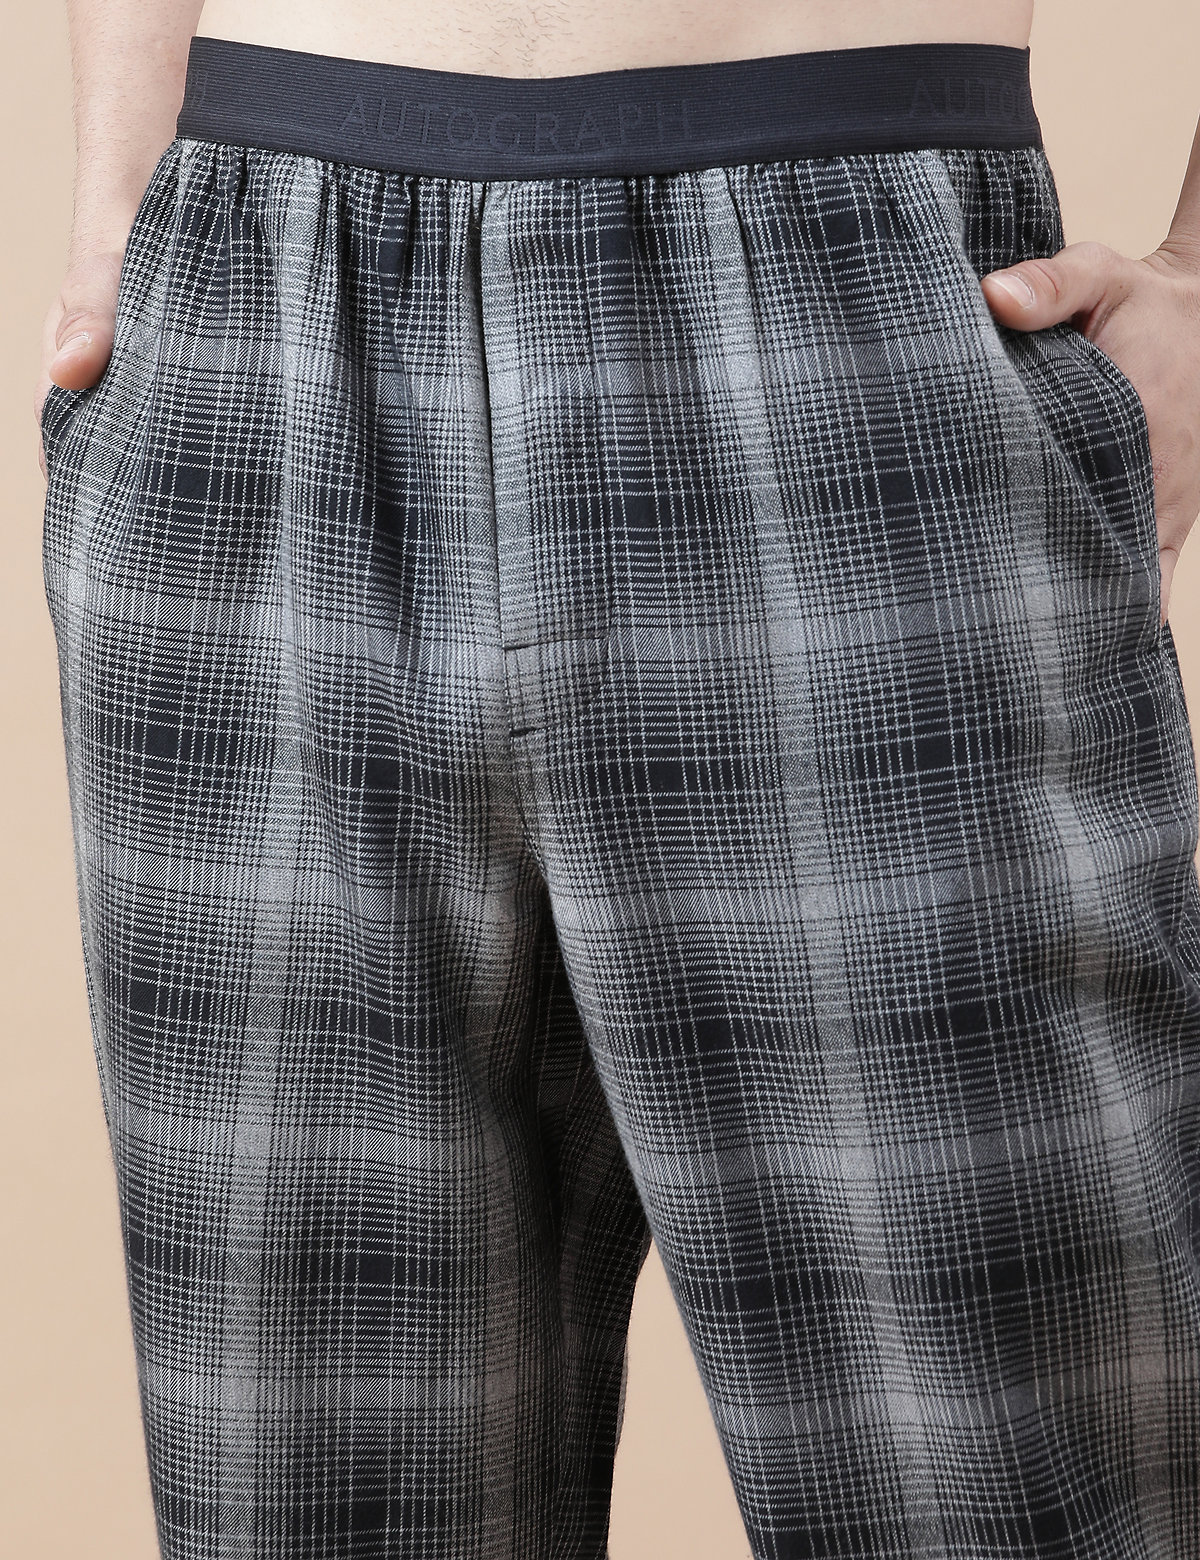 Cotton Mix Checked Relaxed Fit Pyjama